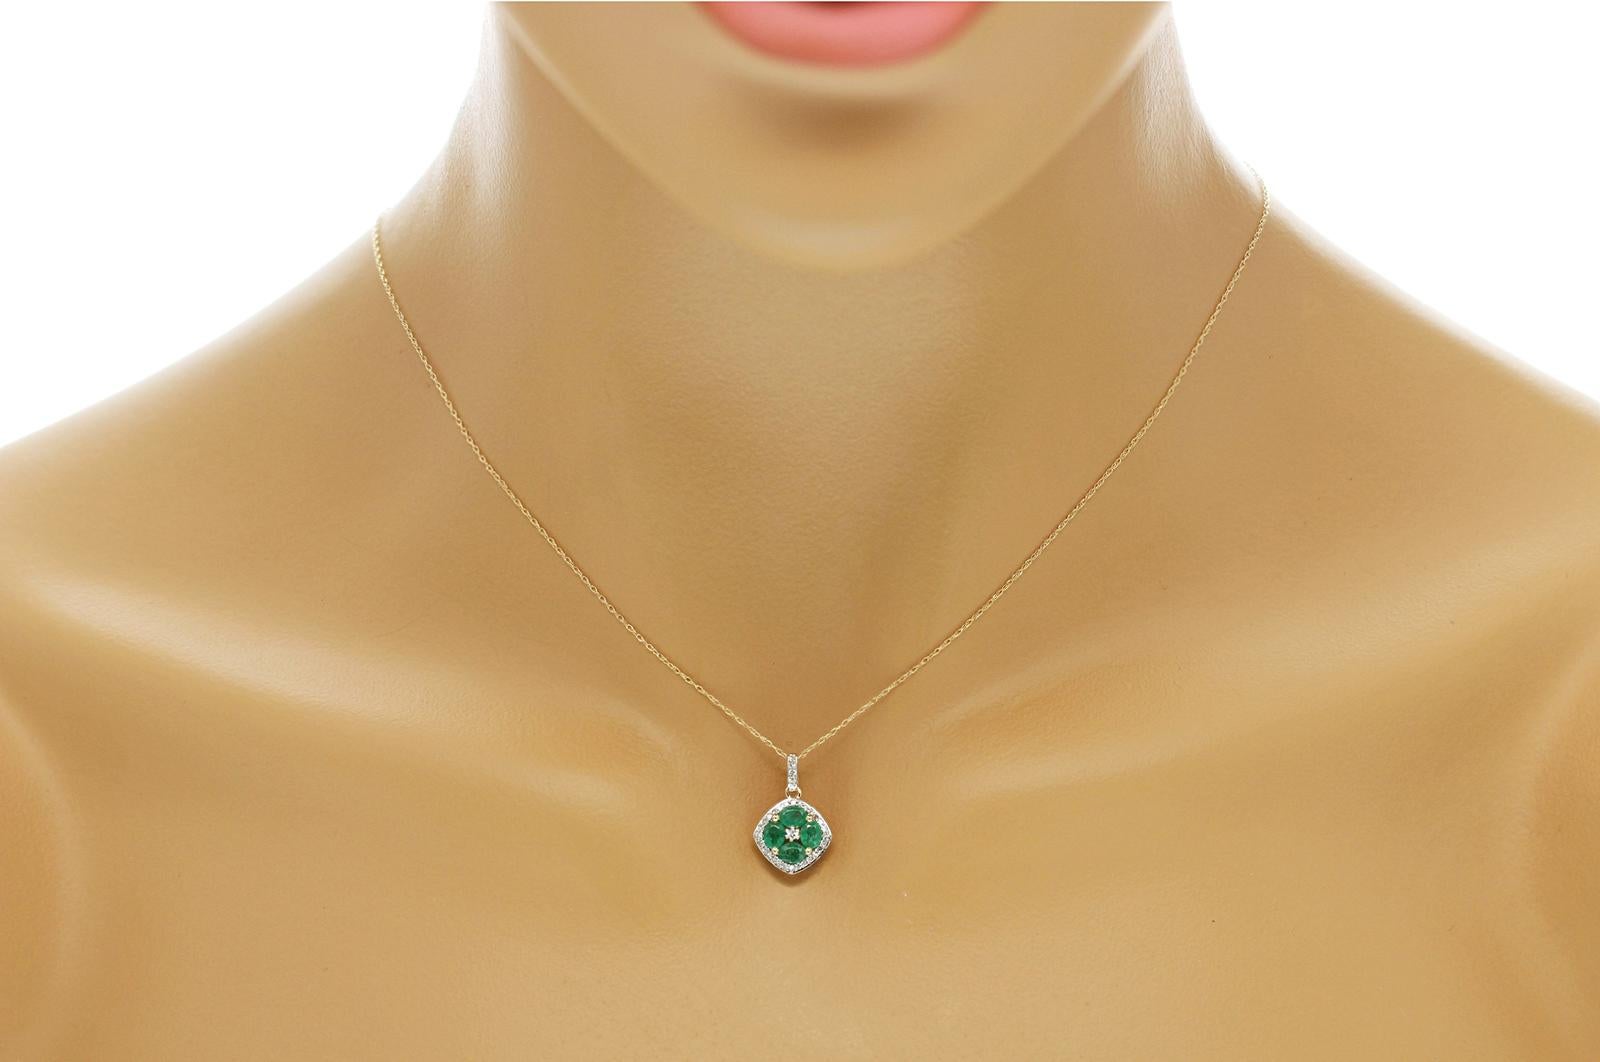 100% Authentic, 100% Customer Satisfaction

Pendant: 12 mm

Chain: 0.5mm

Size: 18 Inches

Metal: 14K Yellow Gold

Hallmarks: 14K

Total Weight: 1.6 Grams

Stone Type: 1.20 CT Natural Emerald &  Diamond 0.15 CT  H  SI1

Condition: New With Tag